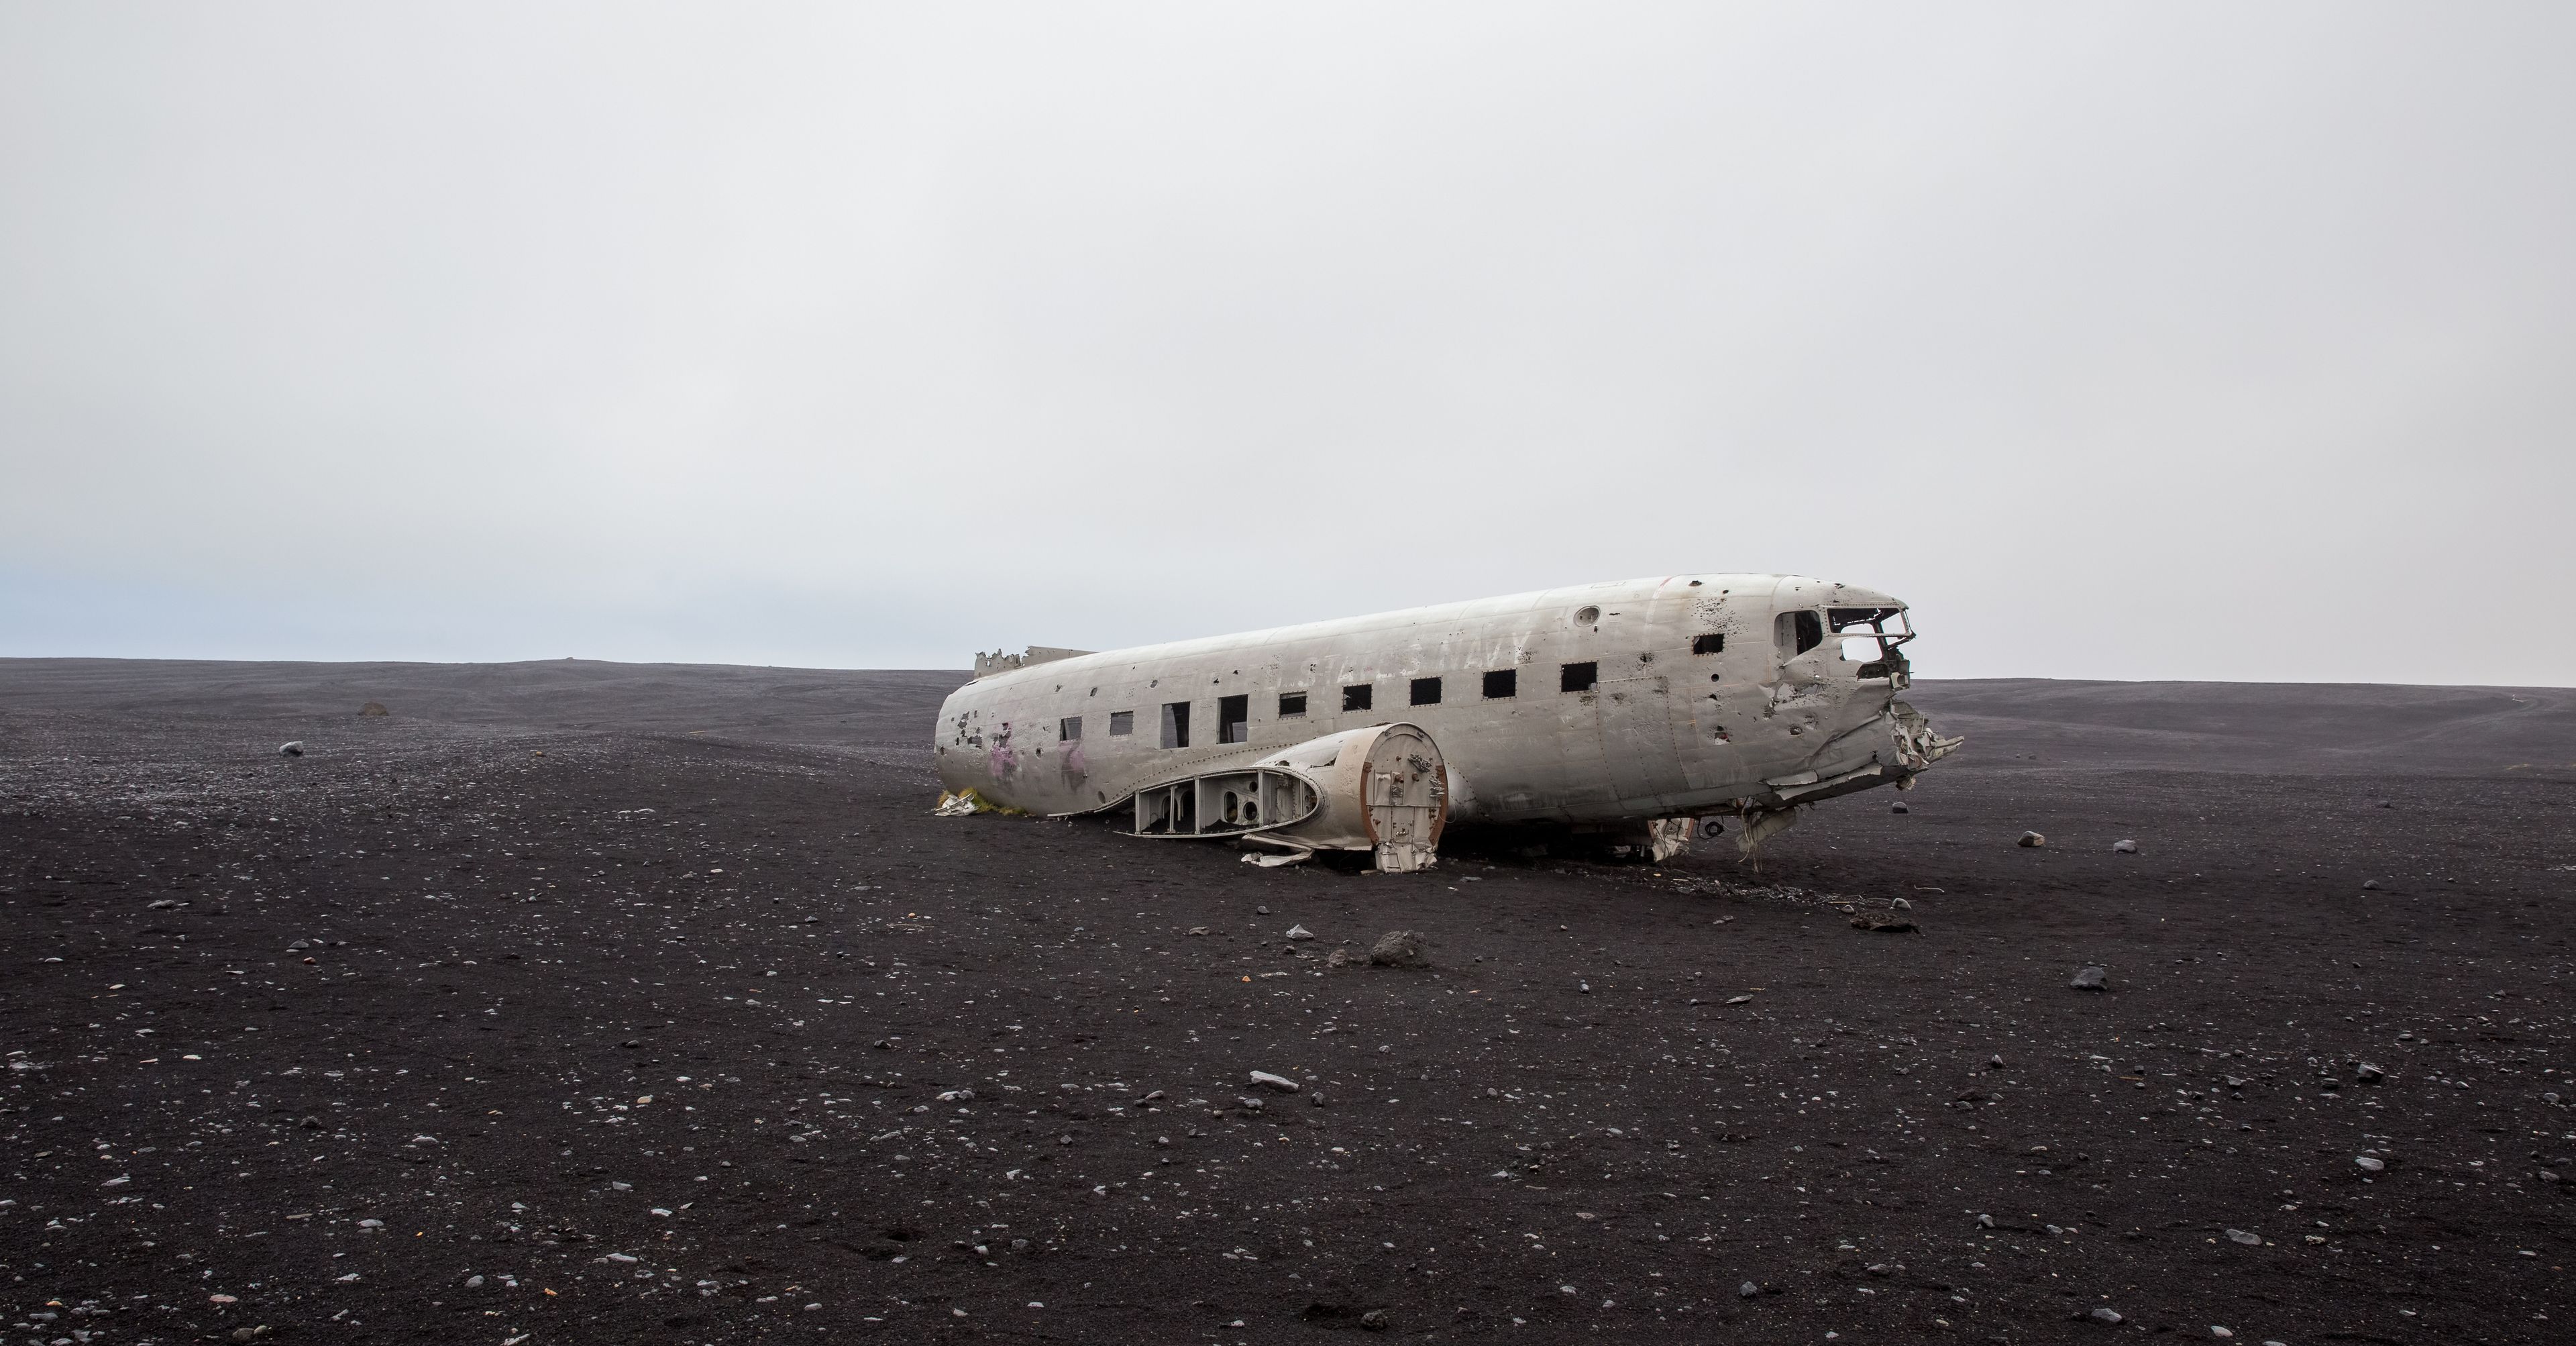 An aerial view of the abandoned DC plane on Solheimasandur beach in Iceland. The plane rests in the middle of a vast black sand beach.